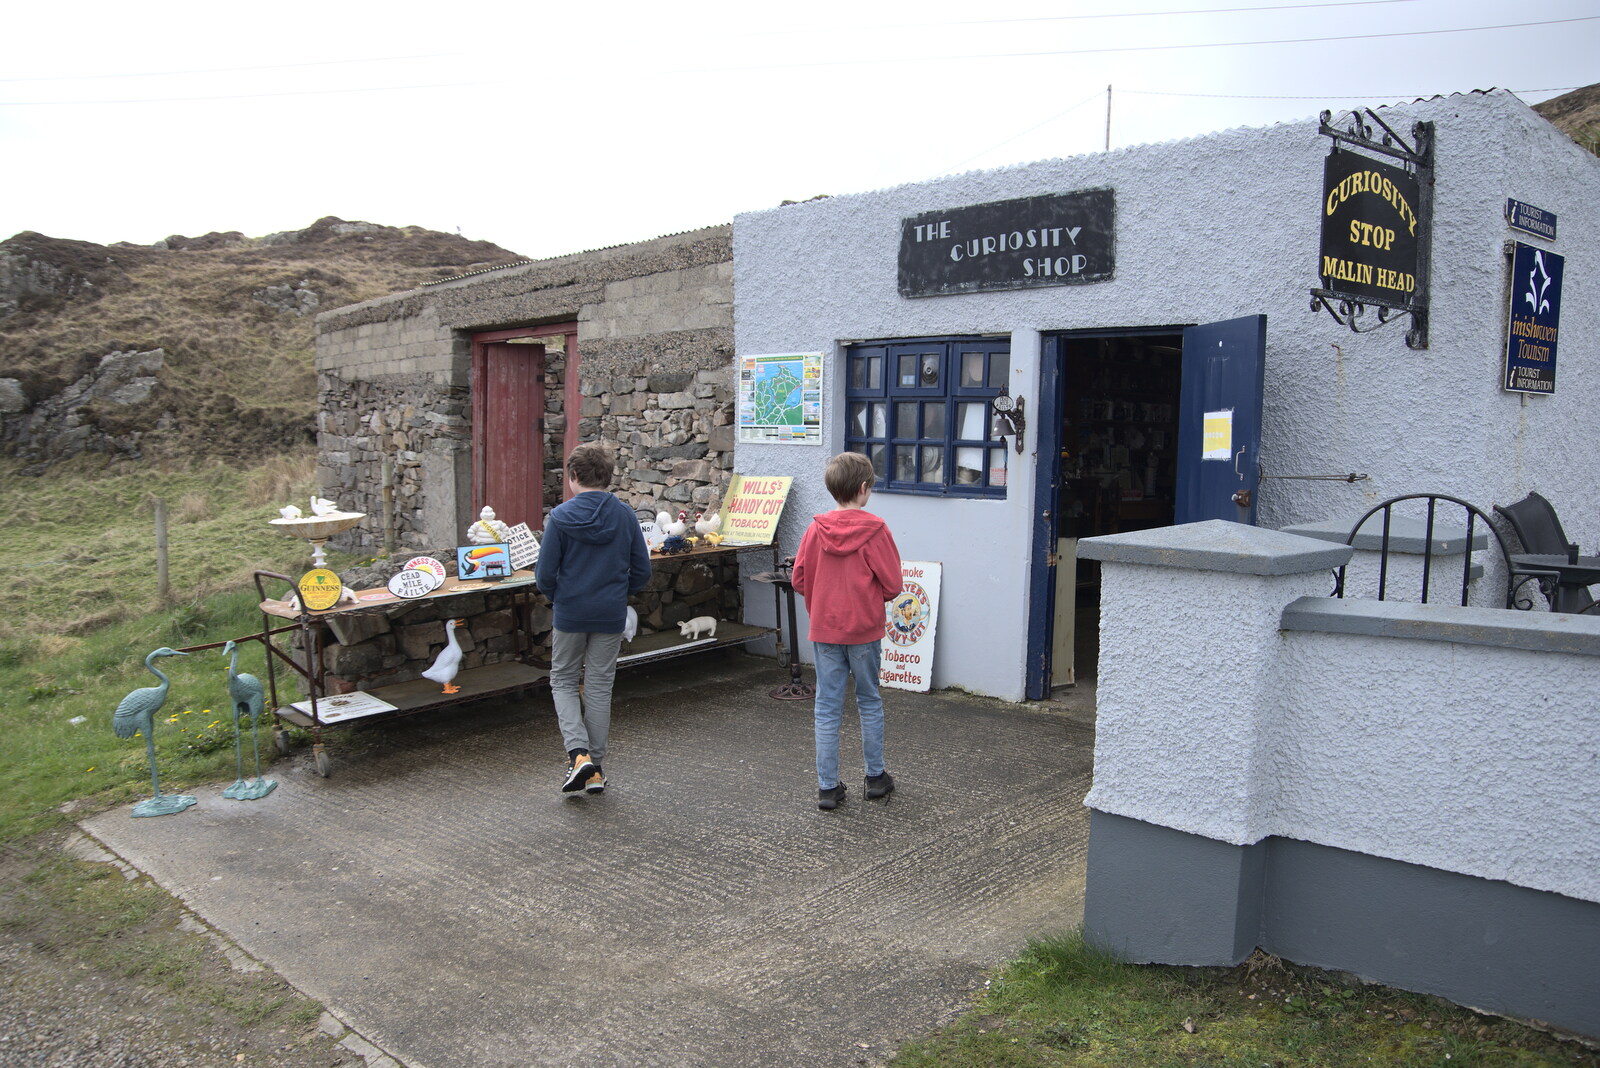 Greencastle, Doagh and Malin Head, County Donegal, Ireland - 19th April 2022: The boys scope out the Curiosity Stop